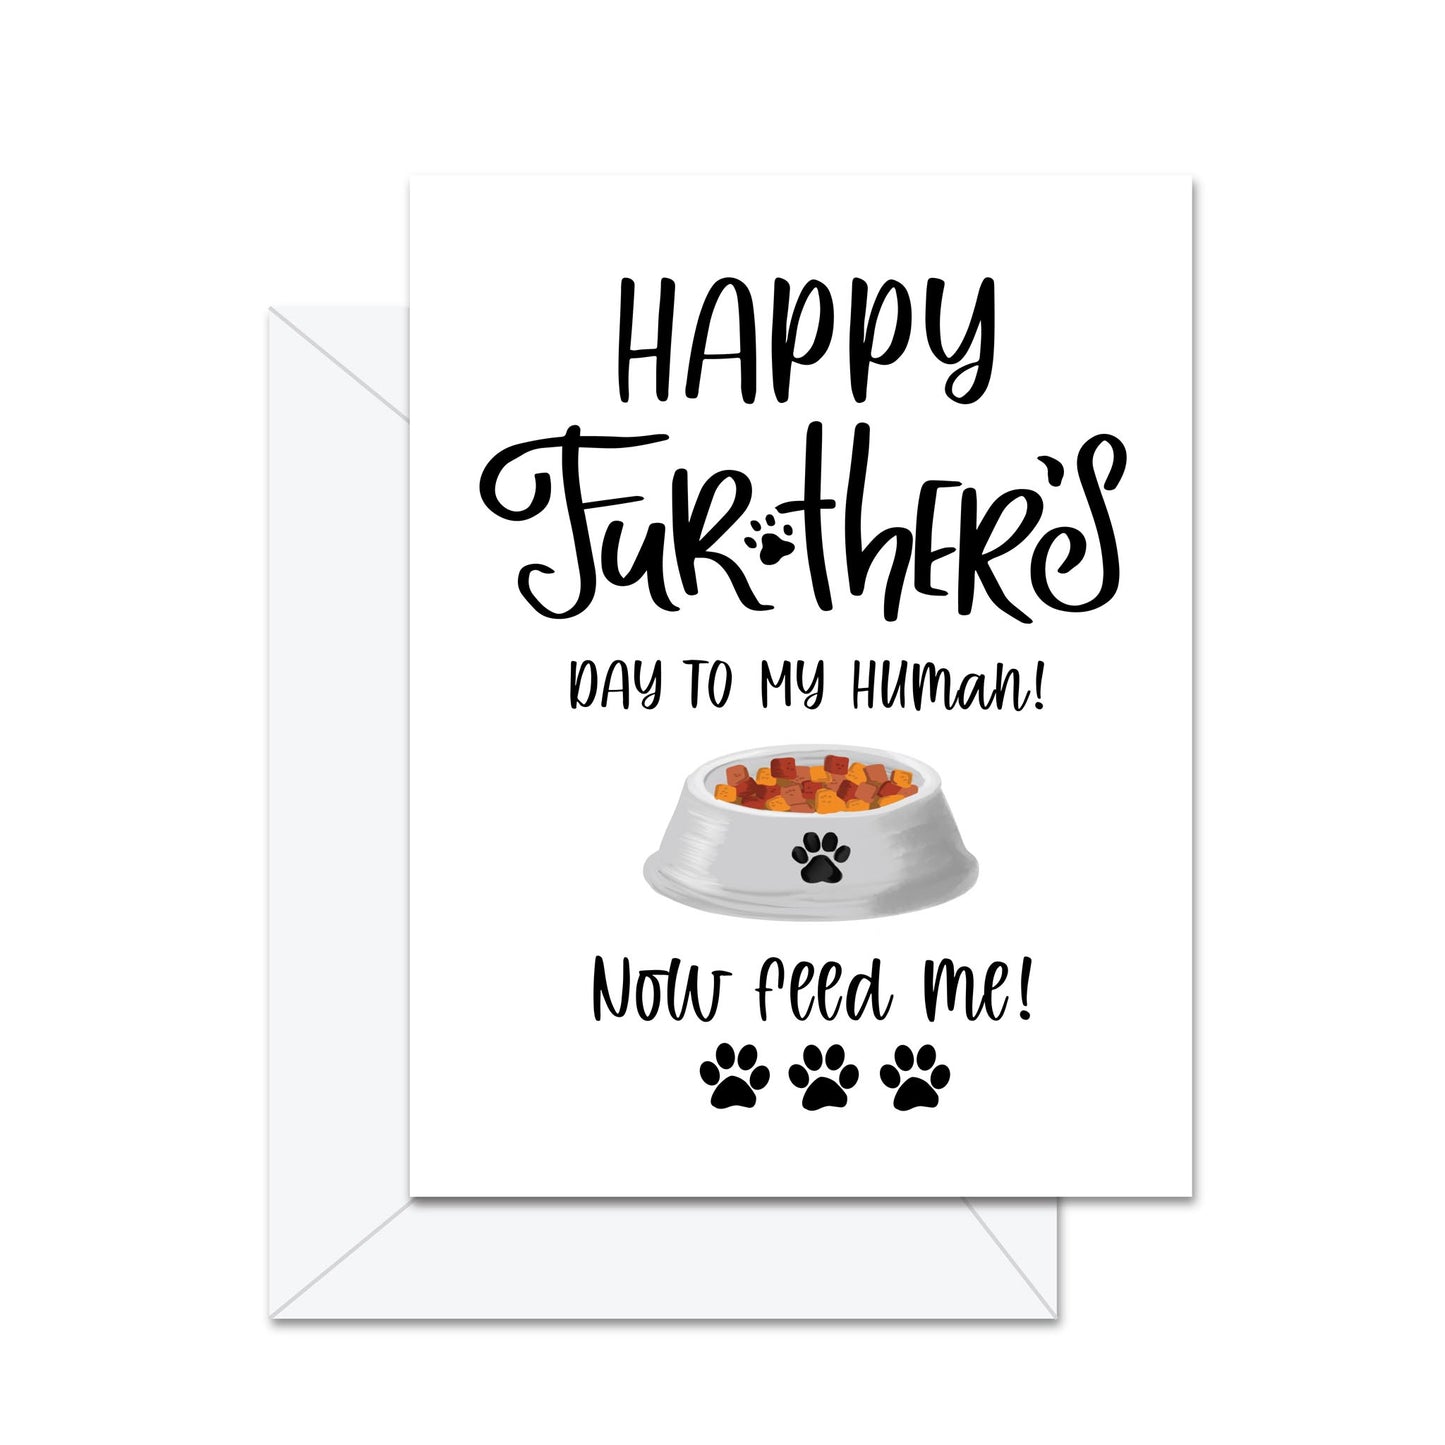 Happy Fur-ther's Day To My Human! - Greeting Card